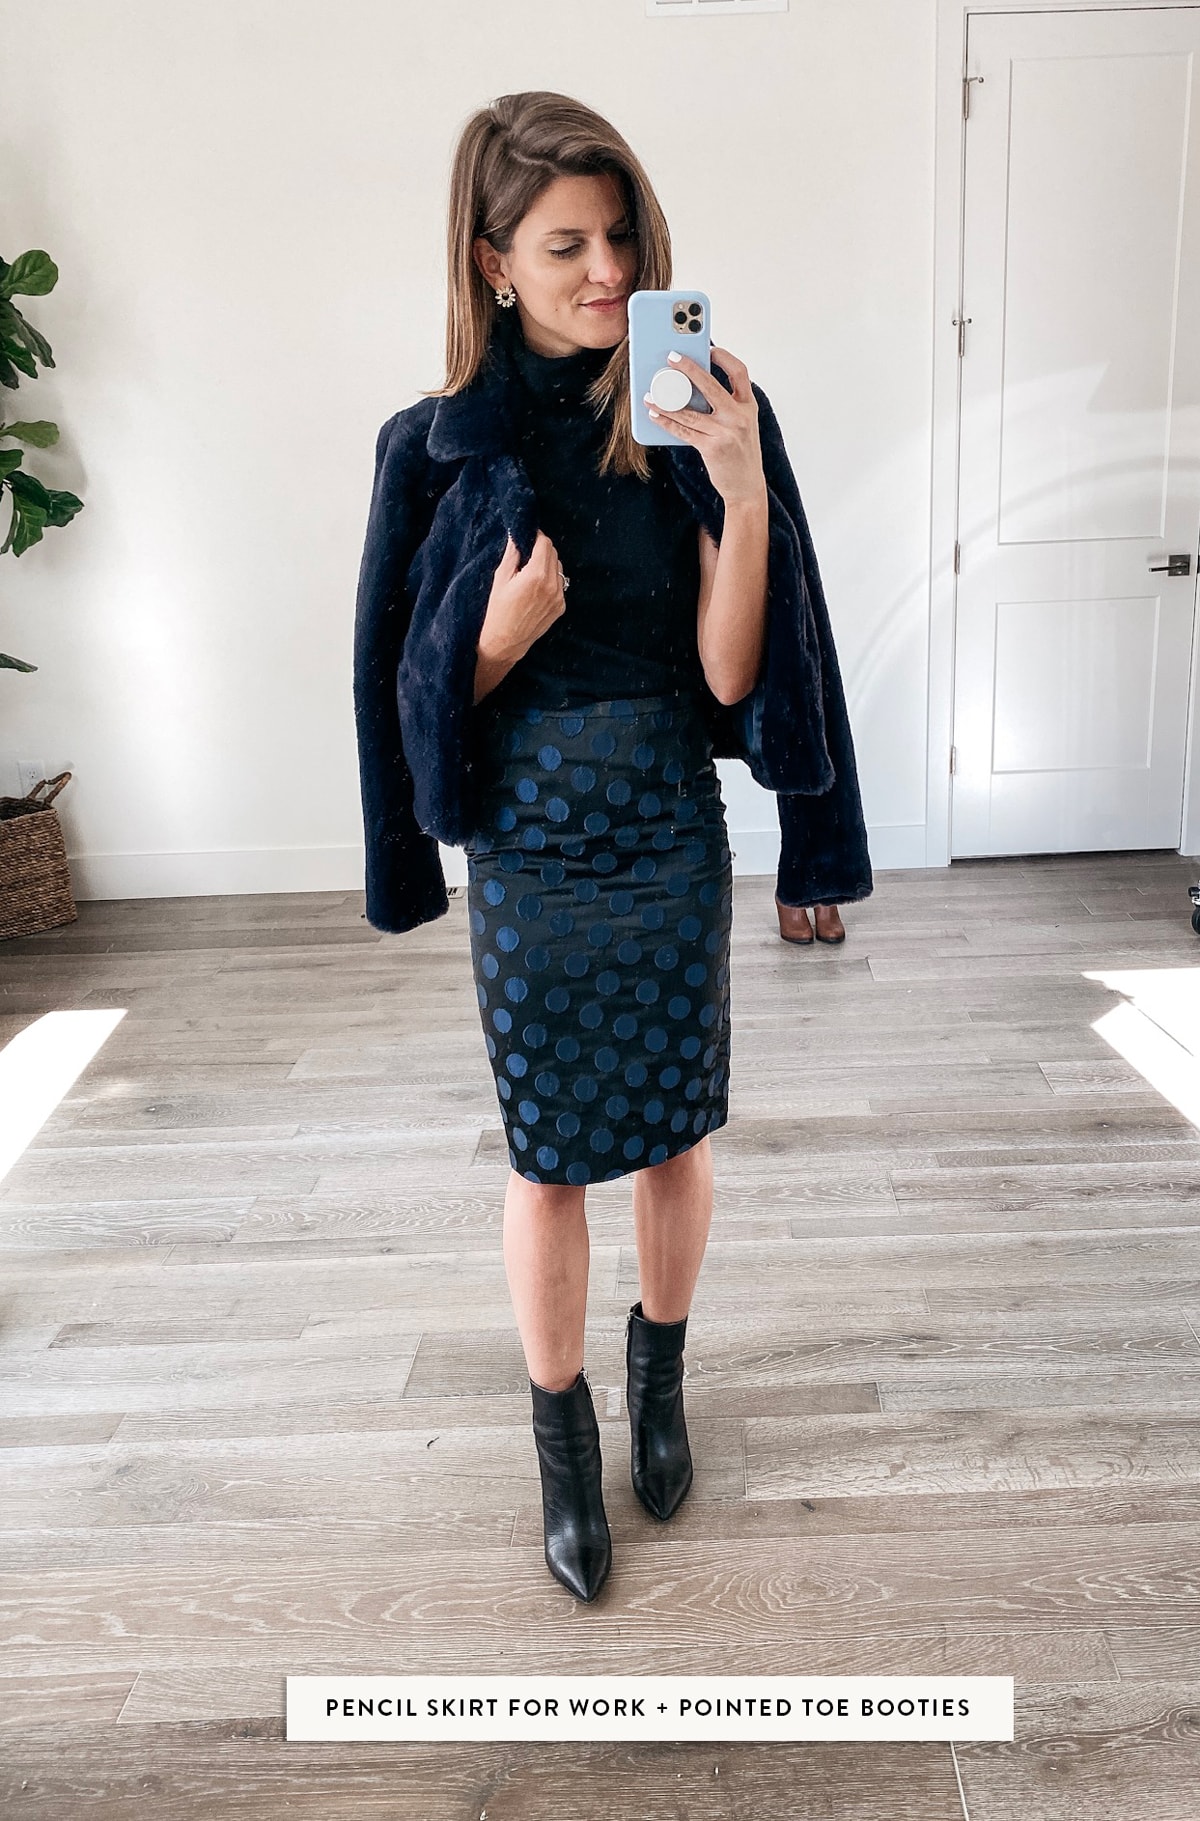 how to wear booties with pencil skirt for work